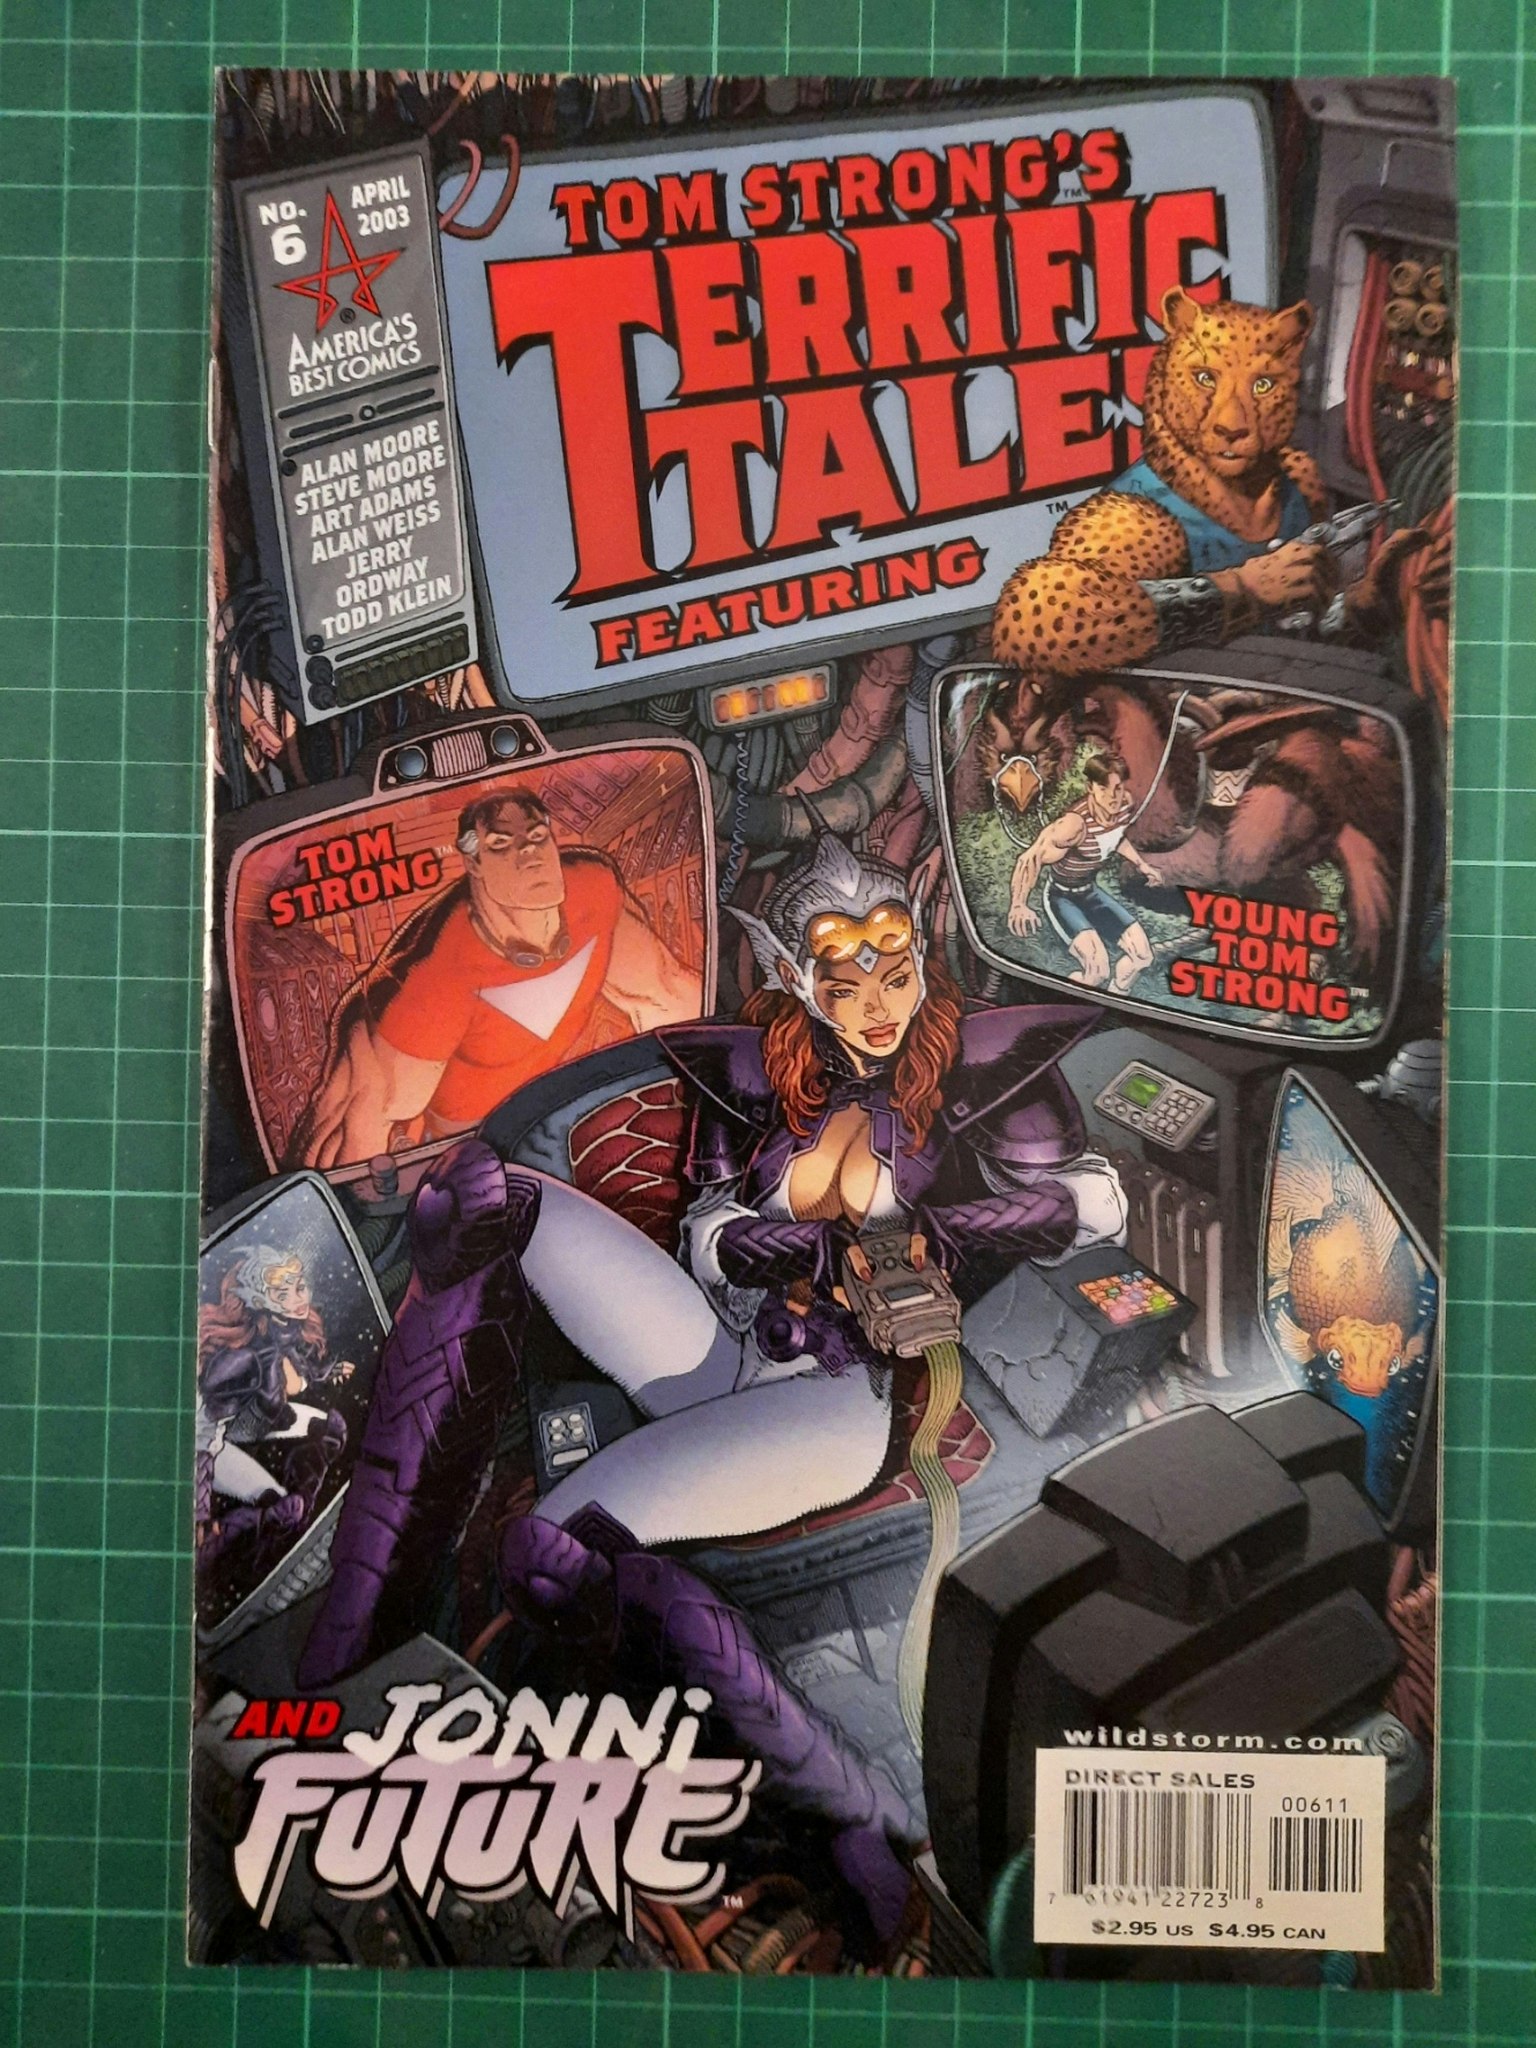 Tom Strong's Terrific tales #06